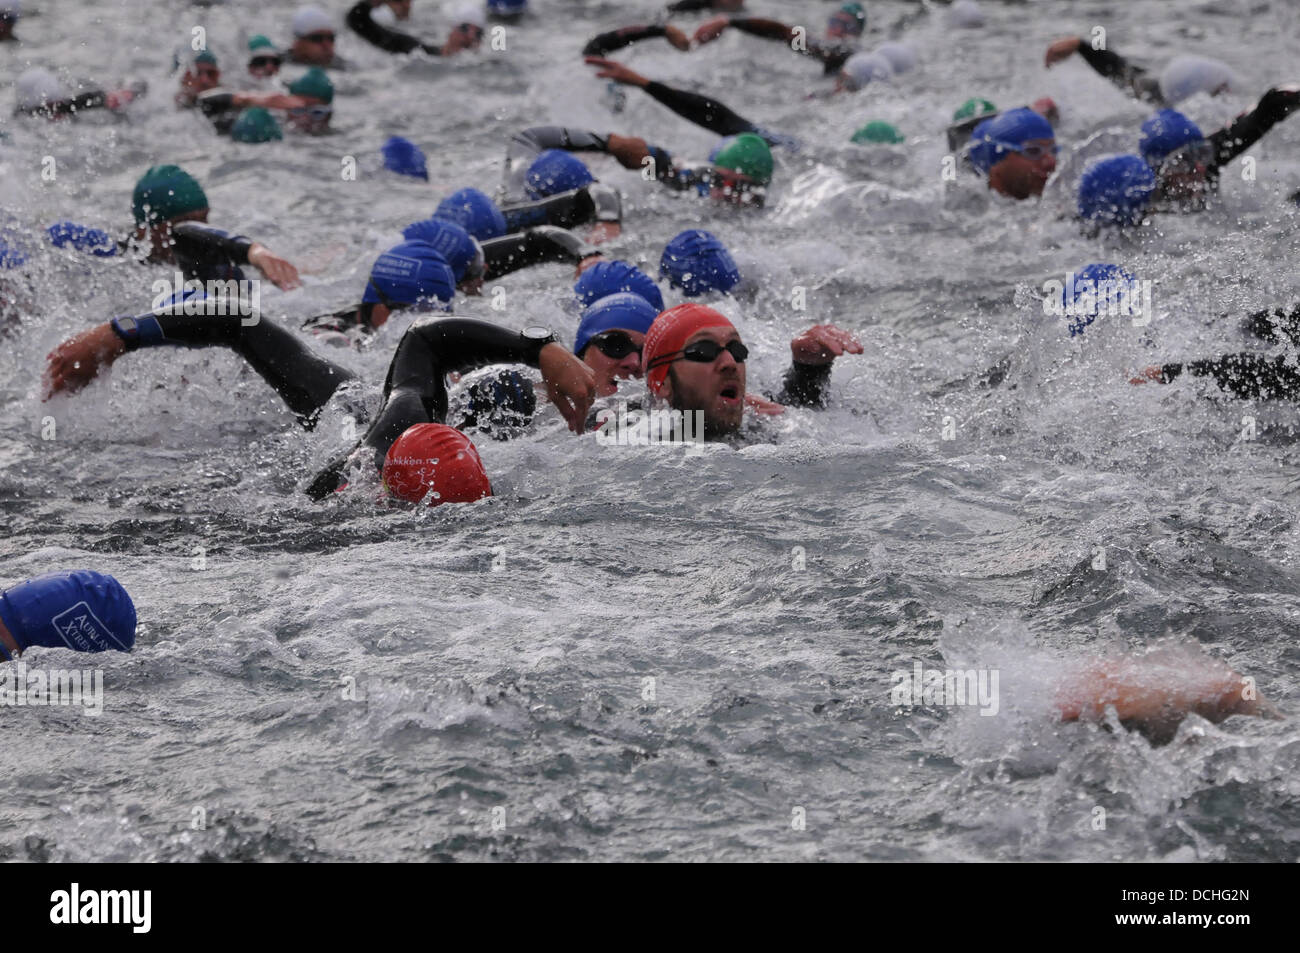 Aurland, Norway. 17th Aug, 2013. The fight for clear water and sight at the opening meters of the 1900m fjord swim at Aurlandsfjellet Xtreme Triathlon 17. August 2013 in Aurland Norway. © Kjell Eirik Irgens Henanger/Alamy Live News Stock Photo